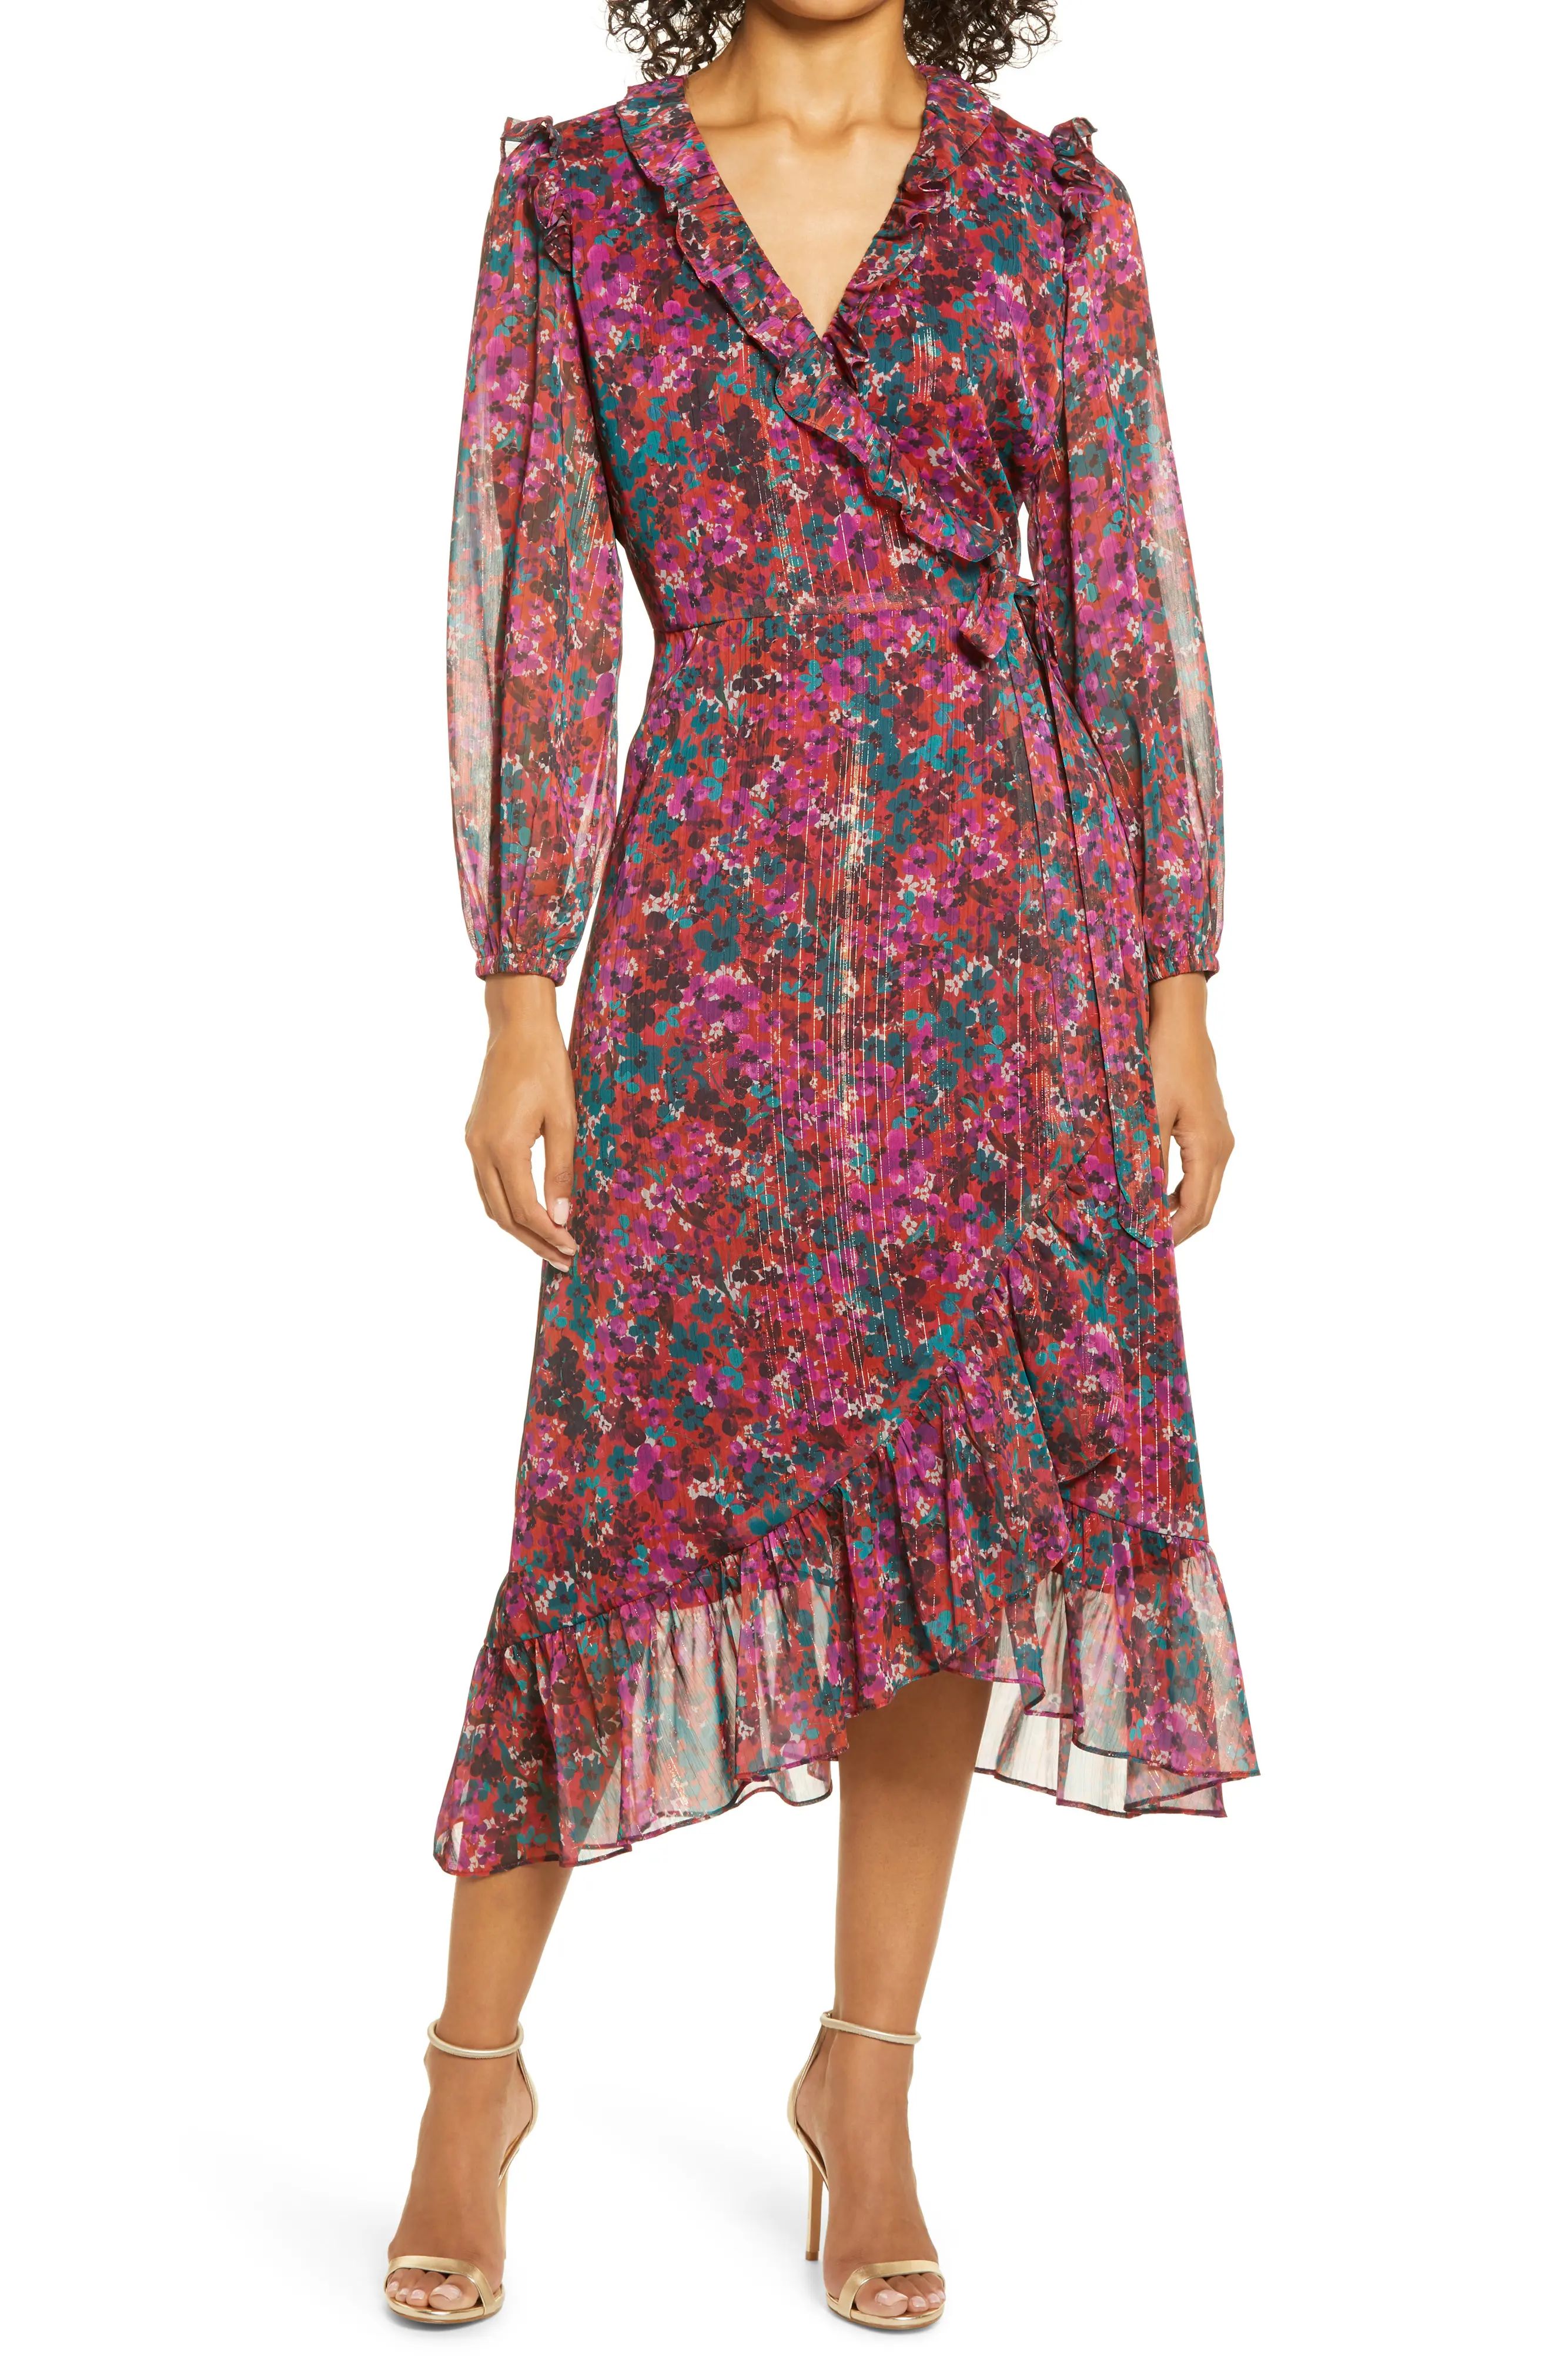 Women's Adelyn Rae Carleigh Floral Chiffon Long Sleeve Wrap Dress, Size X-Small - Purple | Nordstrom